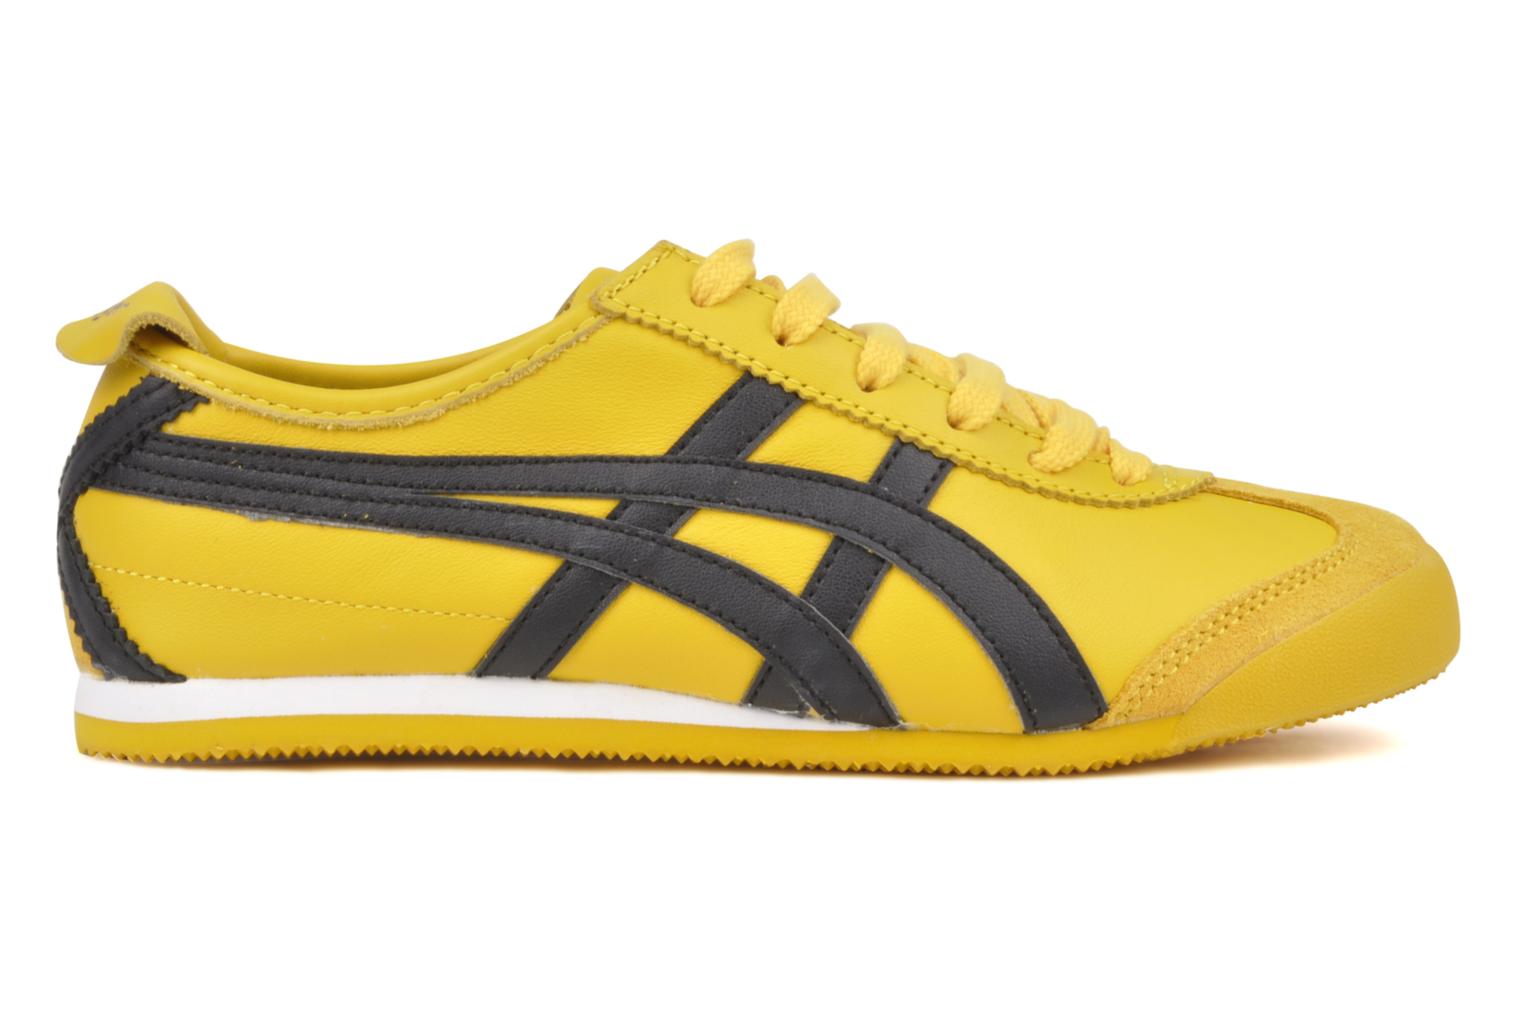 Onitsuka Tiger Mexico 66 W Trainers in Yellow at Sarenza.co.uk (24049)